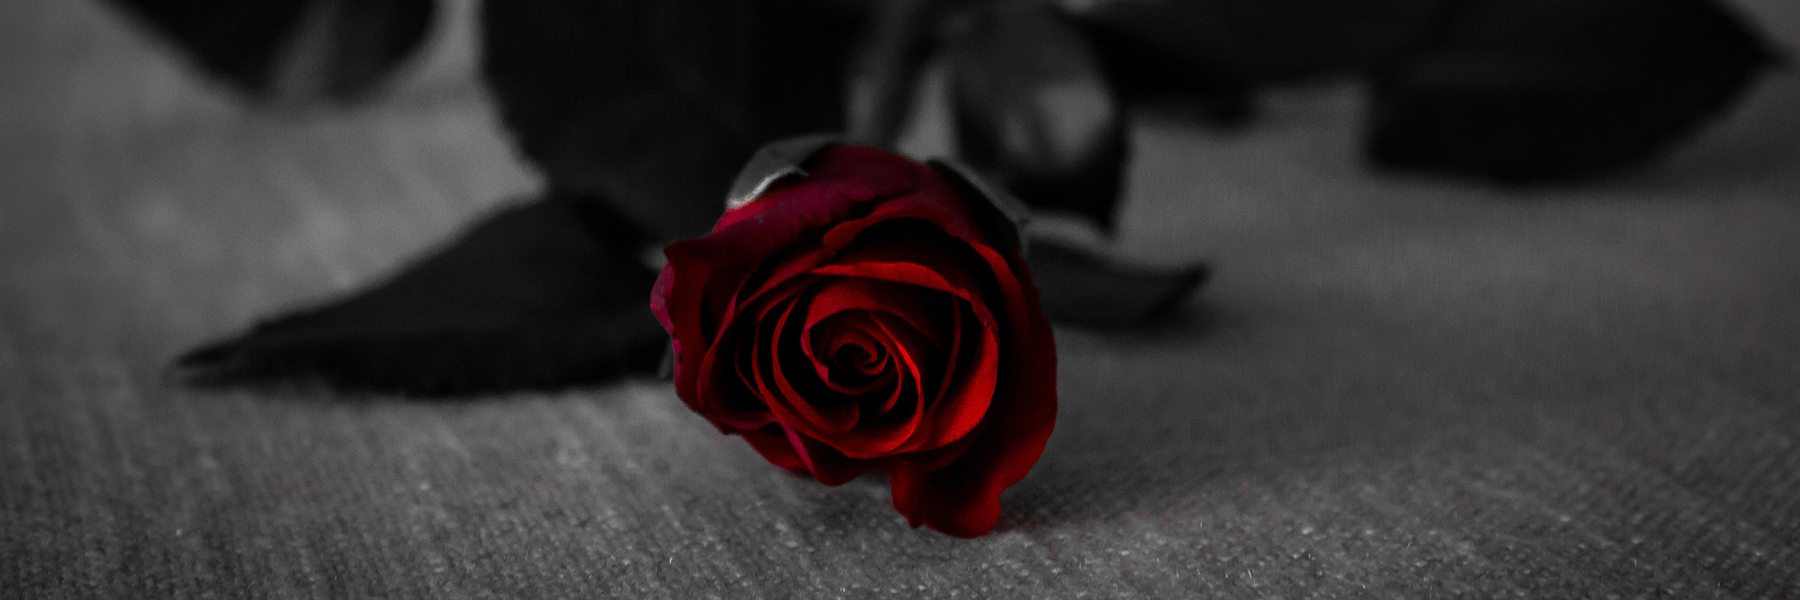 A red rose on a grey background